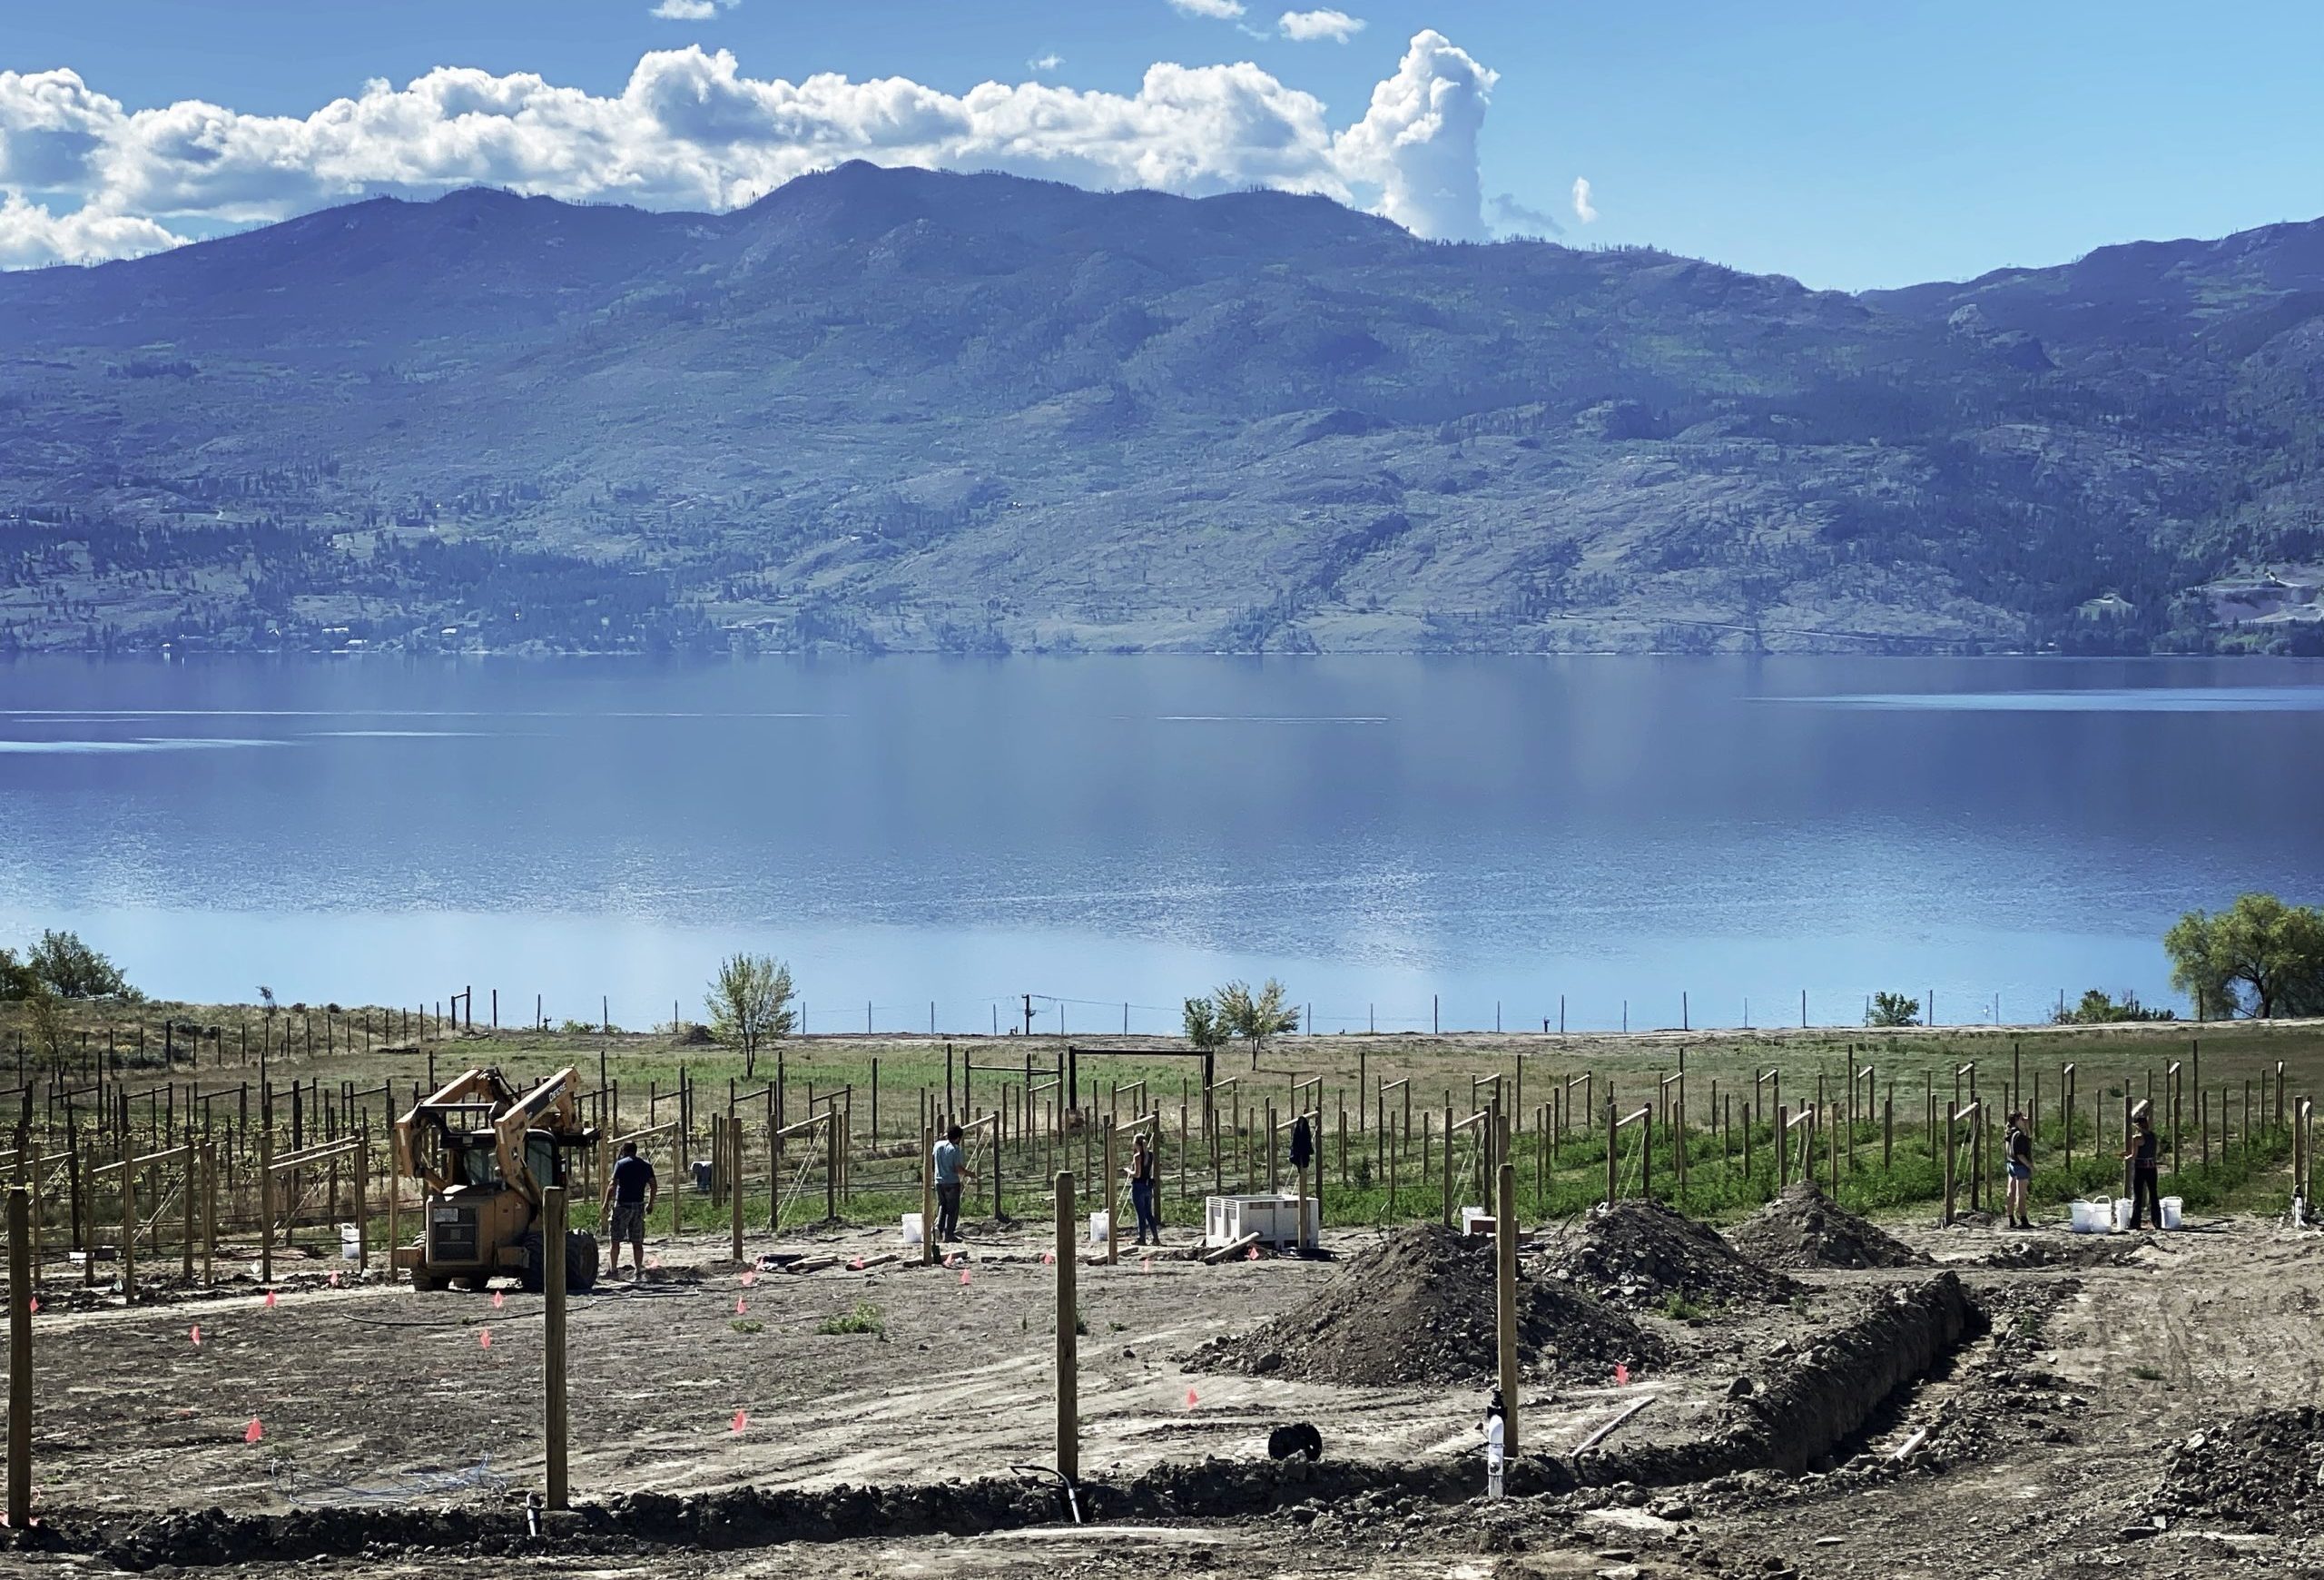 This is a picture with dirt in the foreground, a piece of heavy machinery, people, a vineyard and a lake and mountains can be seen in the background.